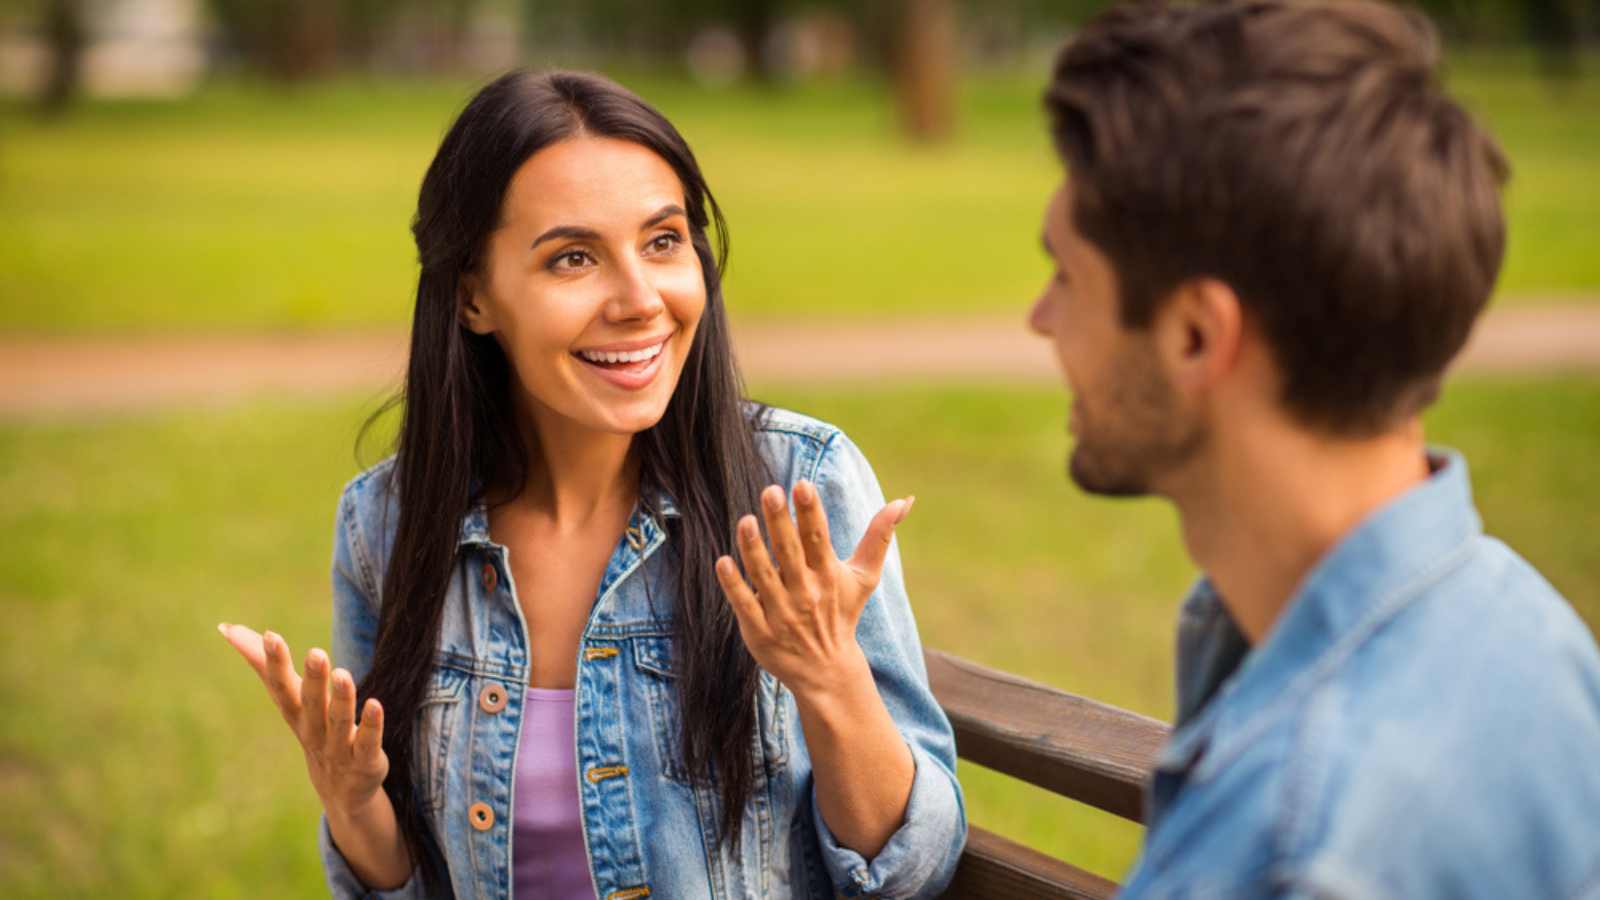 Woman engaging in talk with boy friend